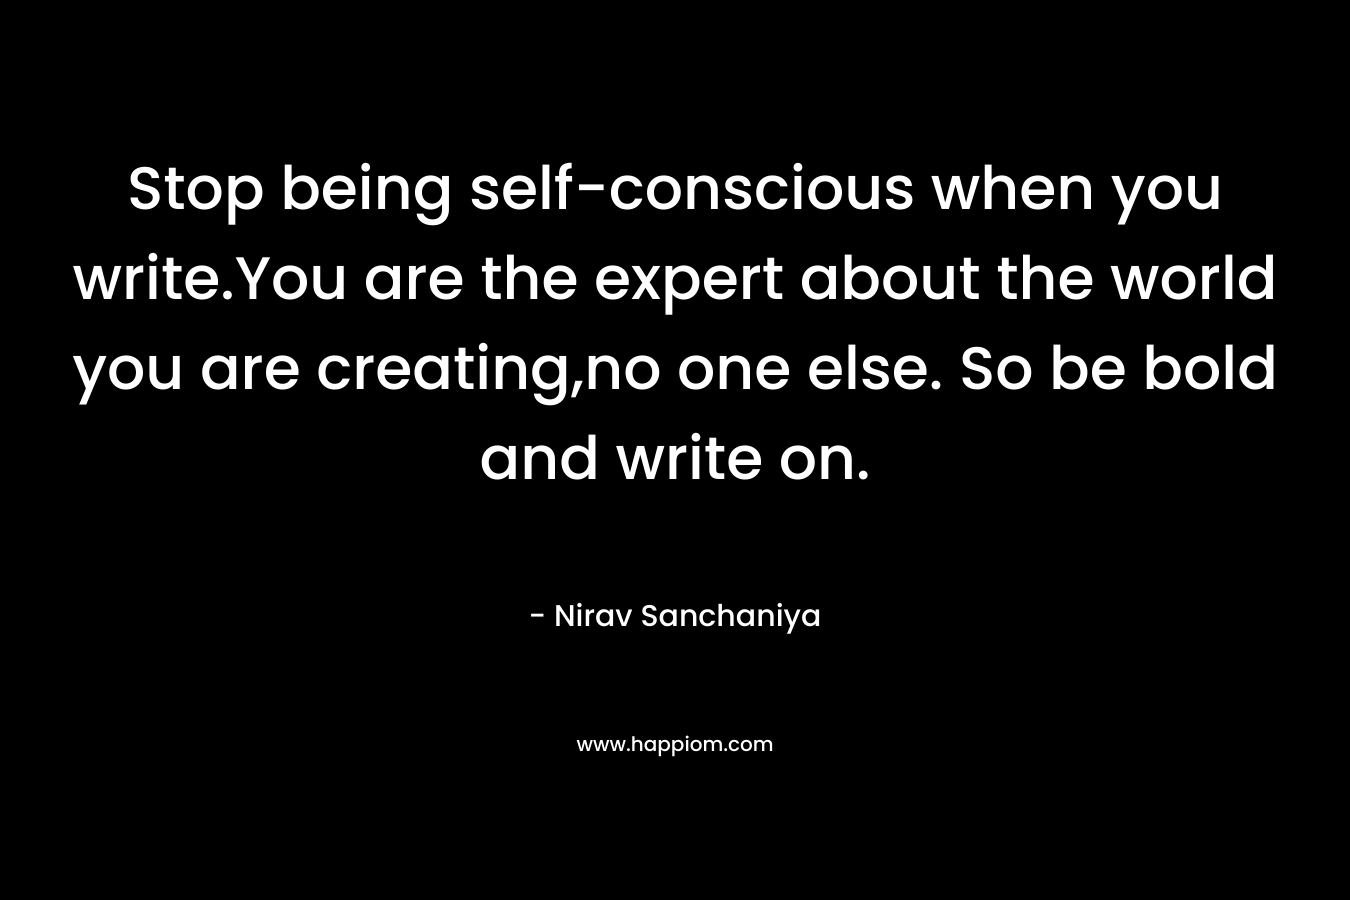 Stop being self-conscious when you write.You are the expert about the world you are creating,no one else. So be bold and write on.